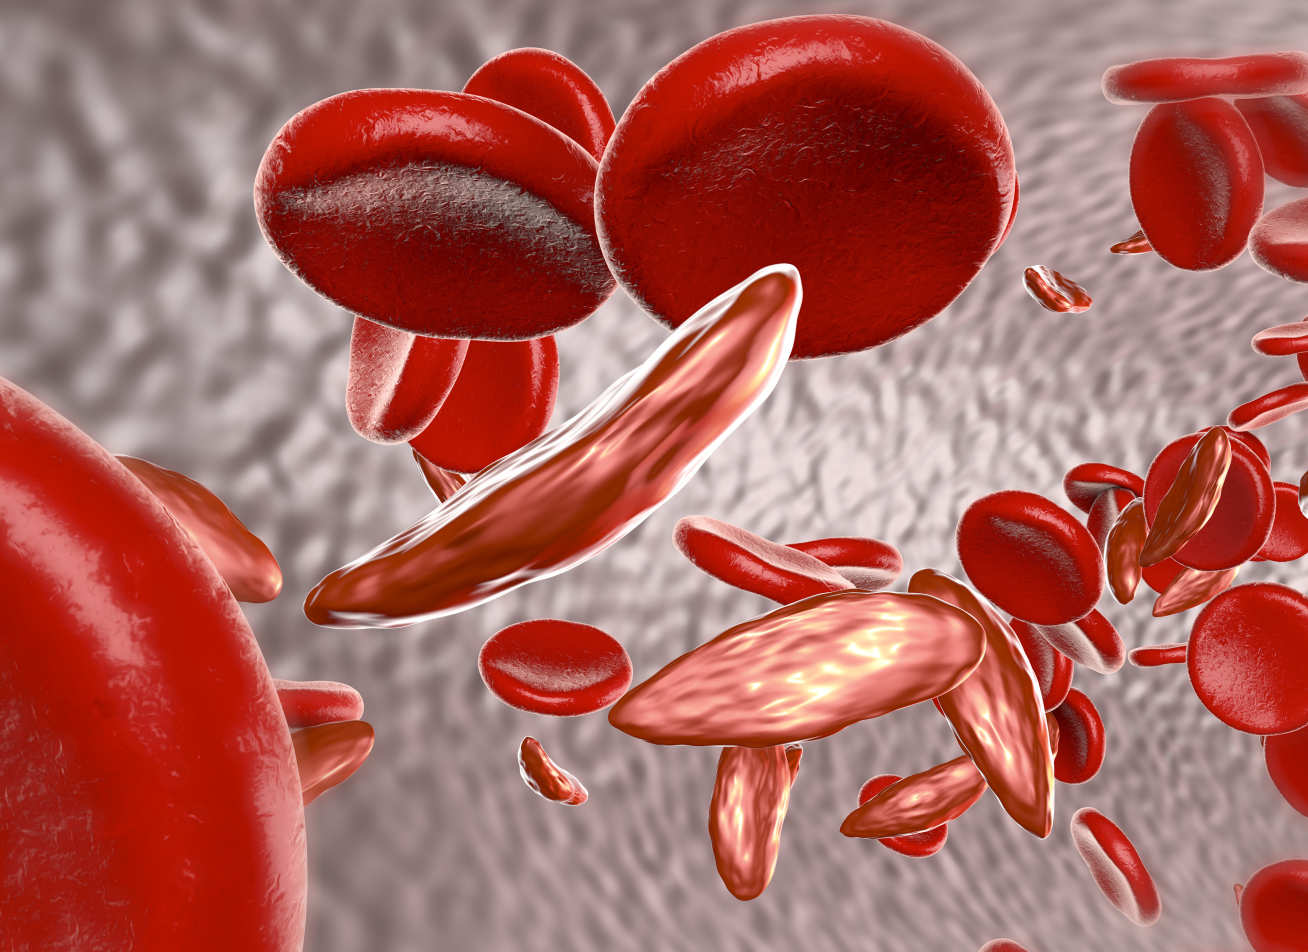 Sickle cell